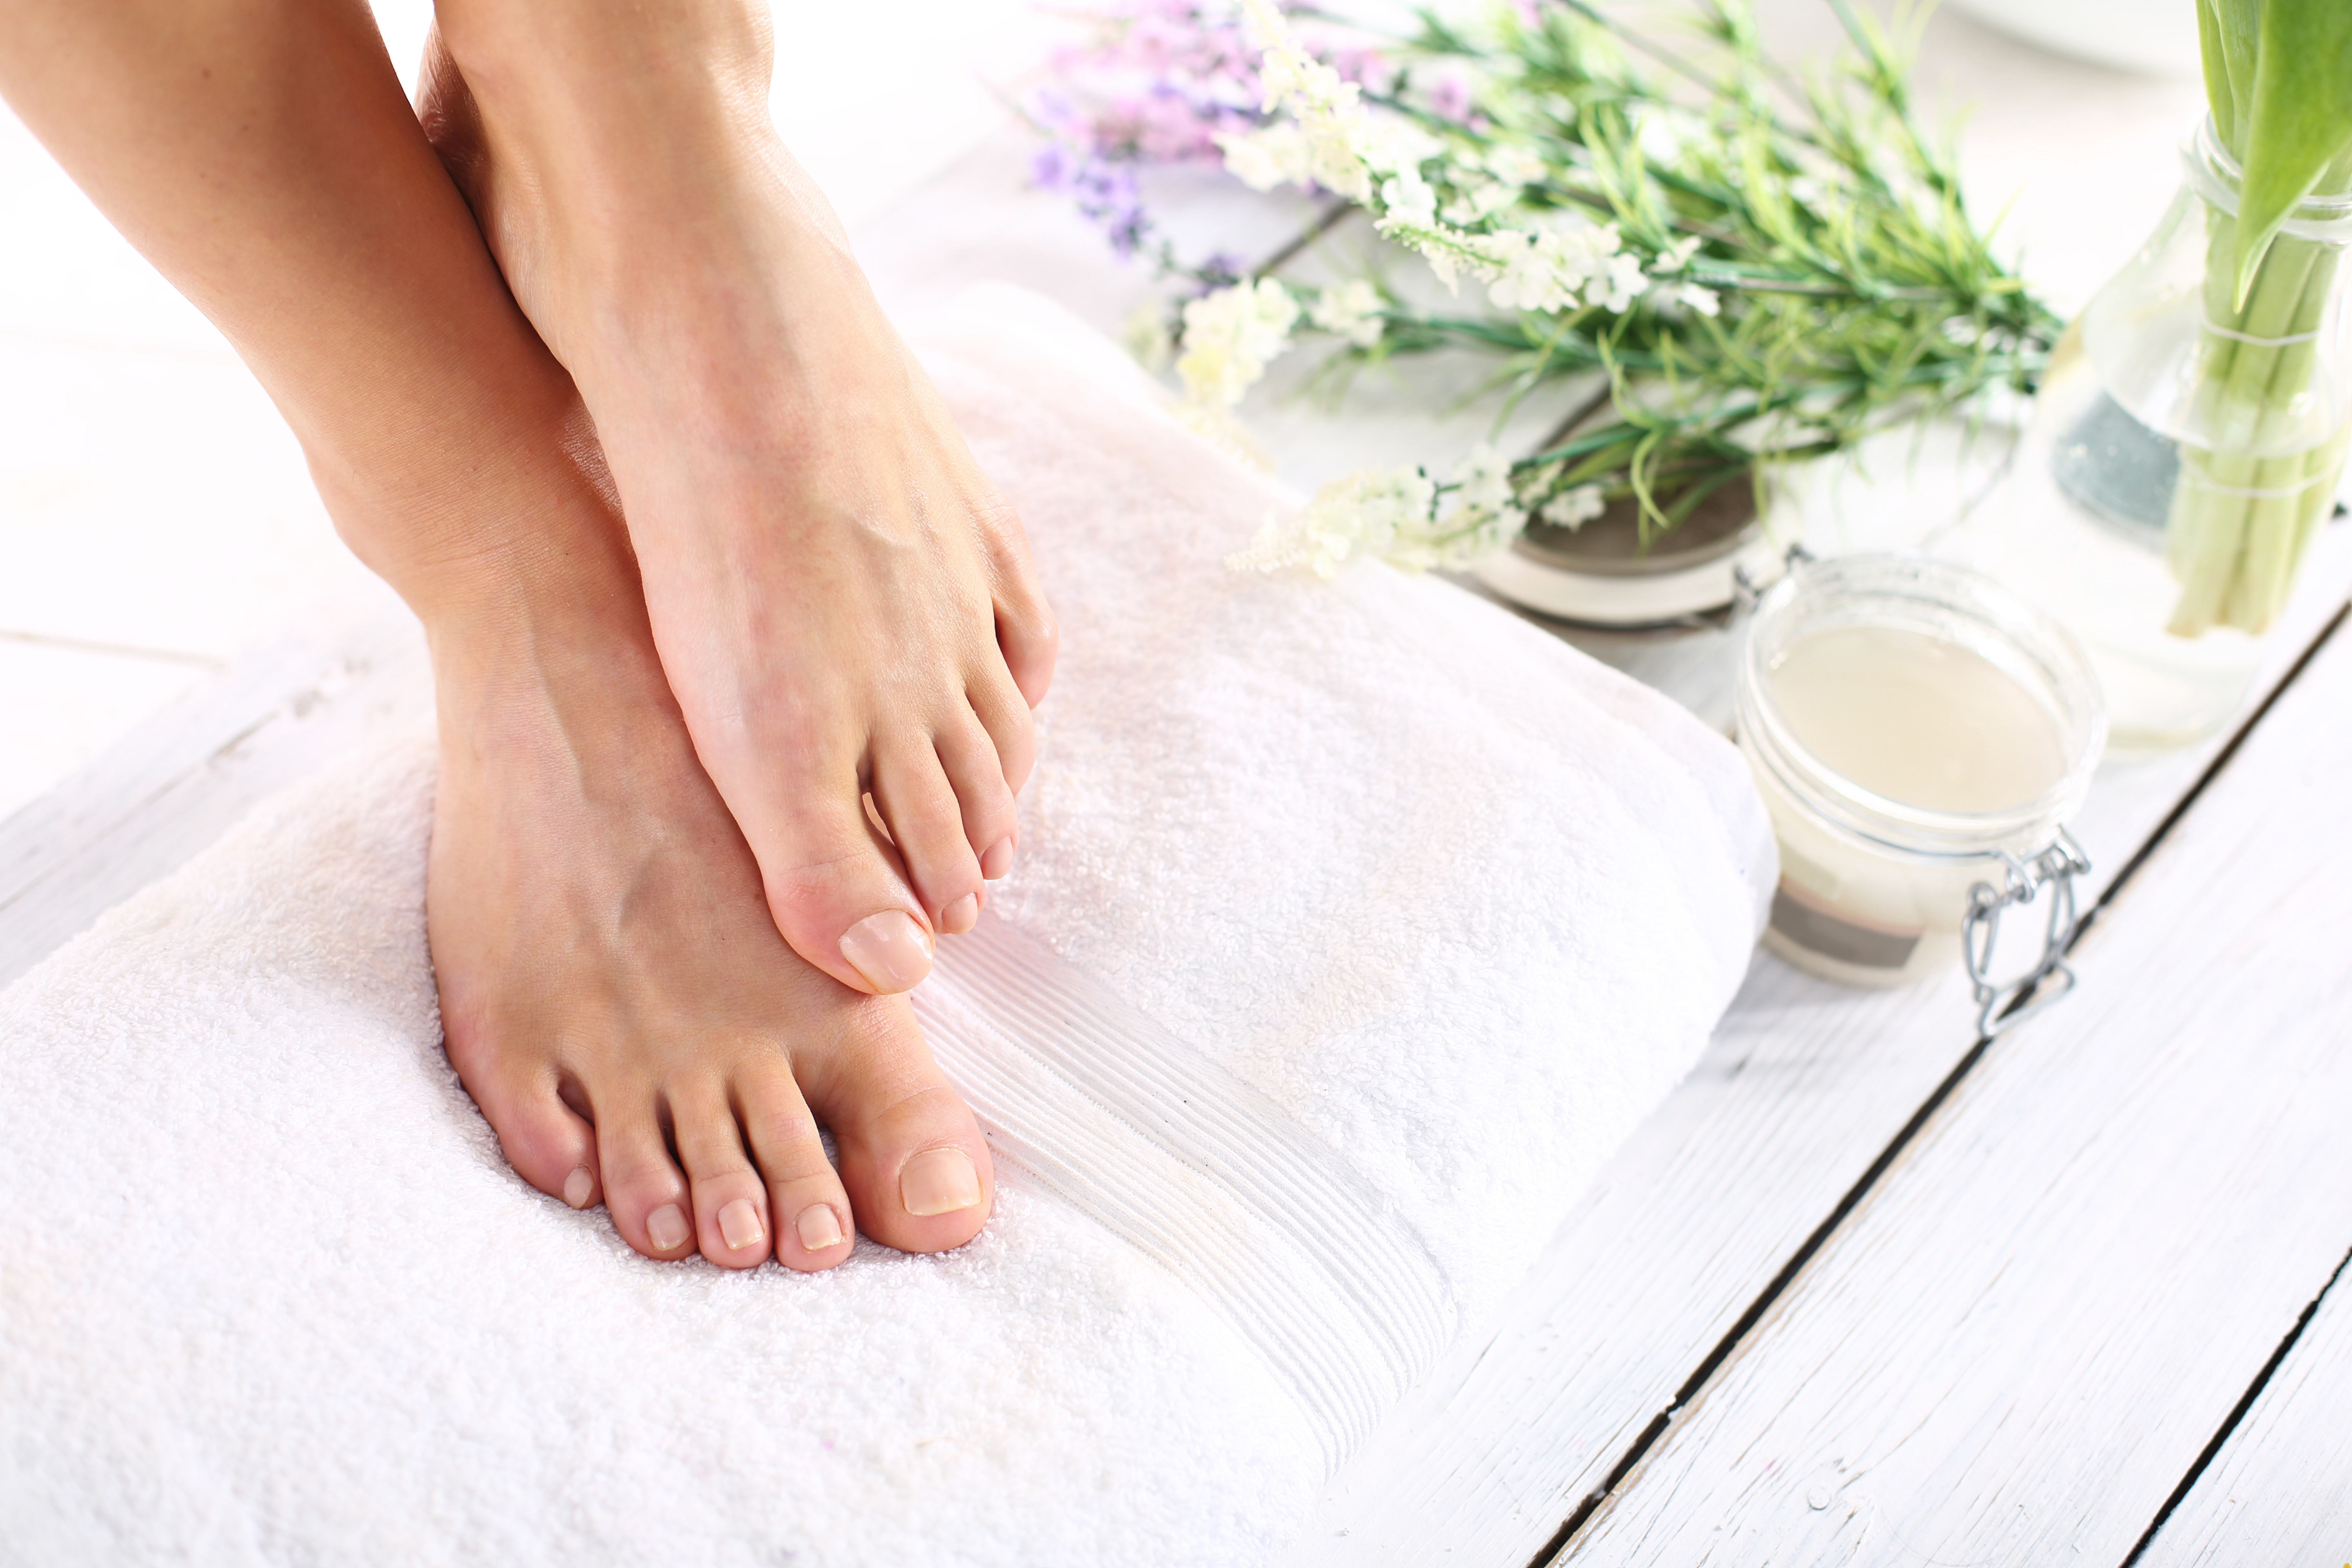 Image of a woman's feet as she is stepping on a towel with spa items beside her.